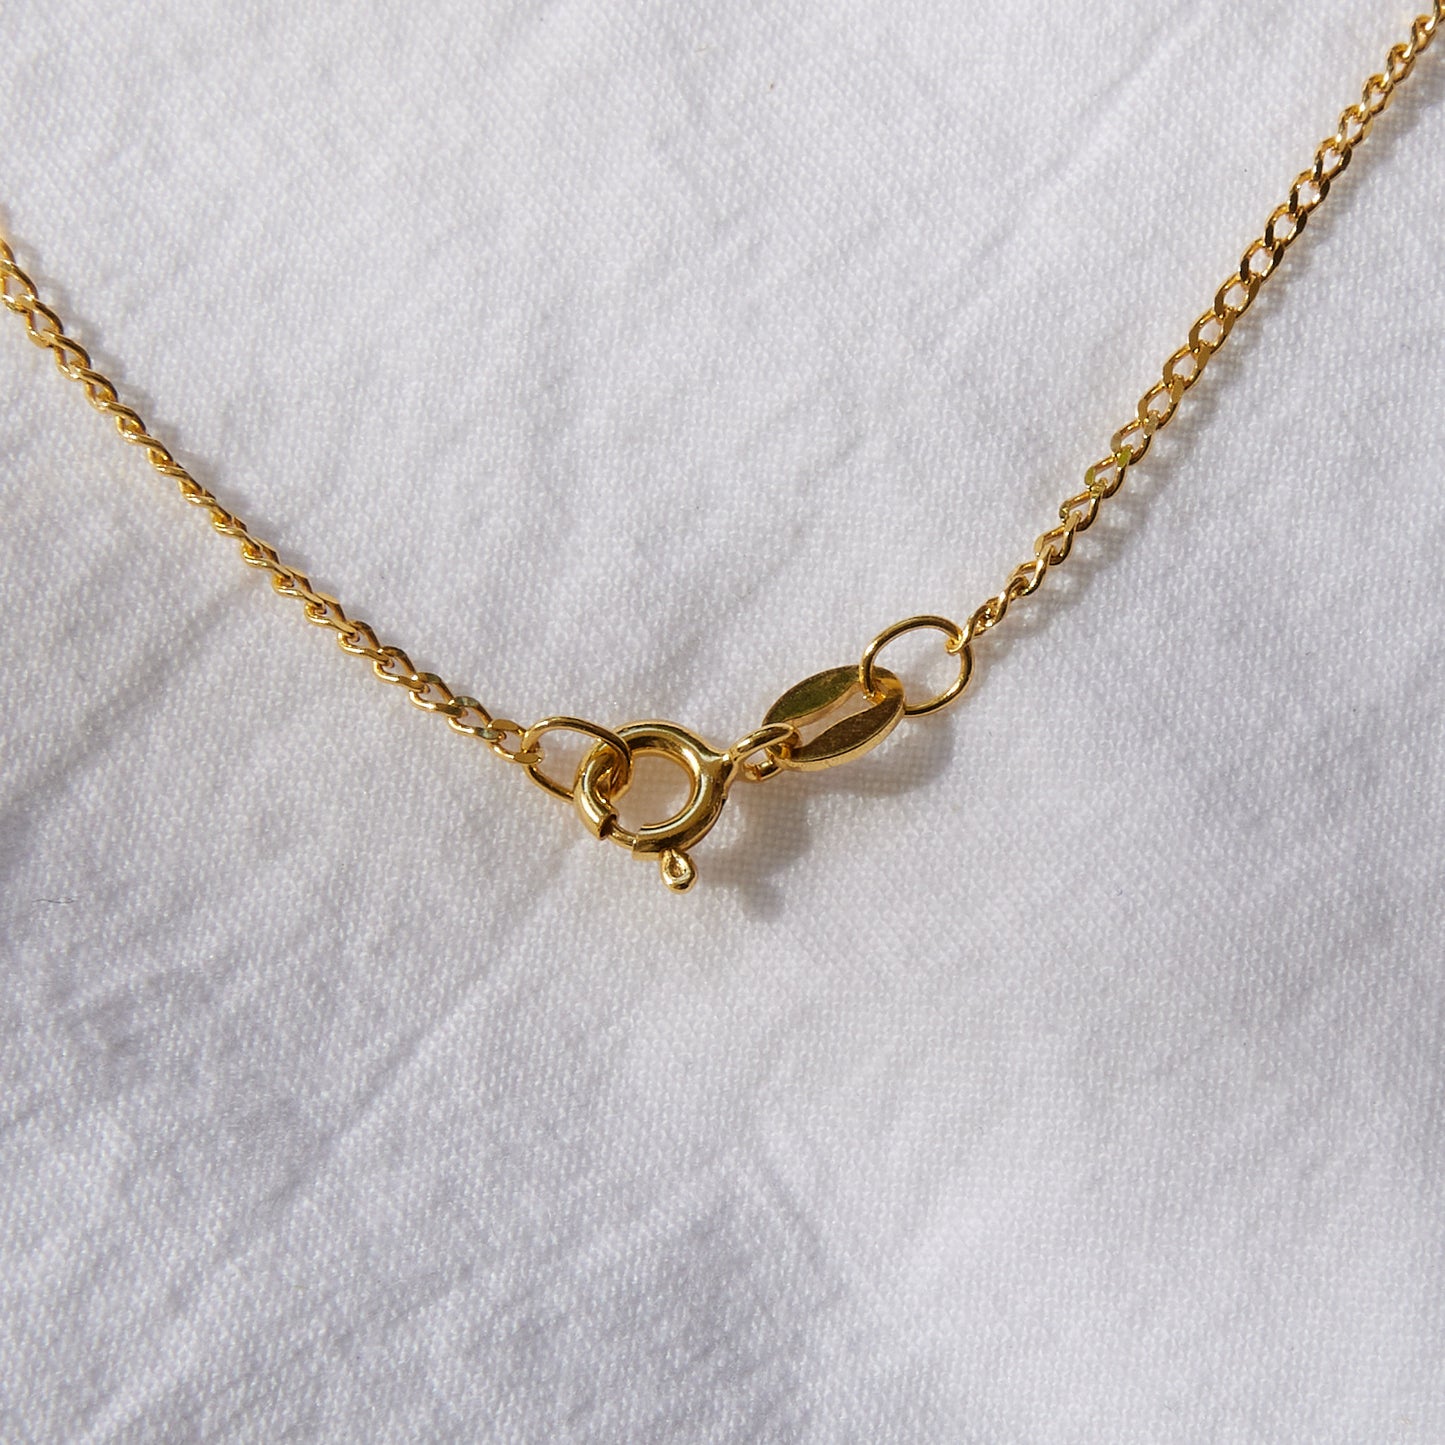 11:11 Necklace 24k Gold Plated Sterling Silver